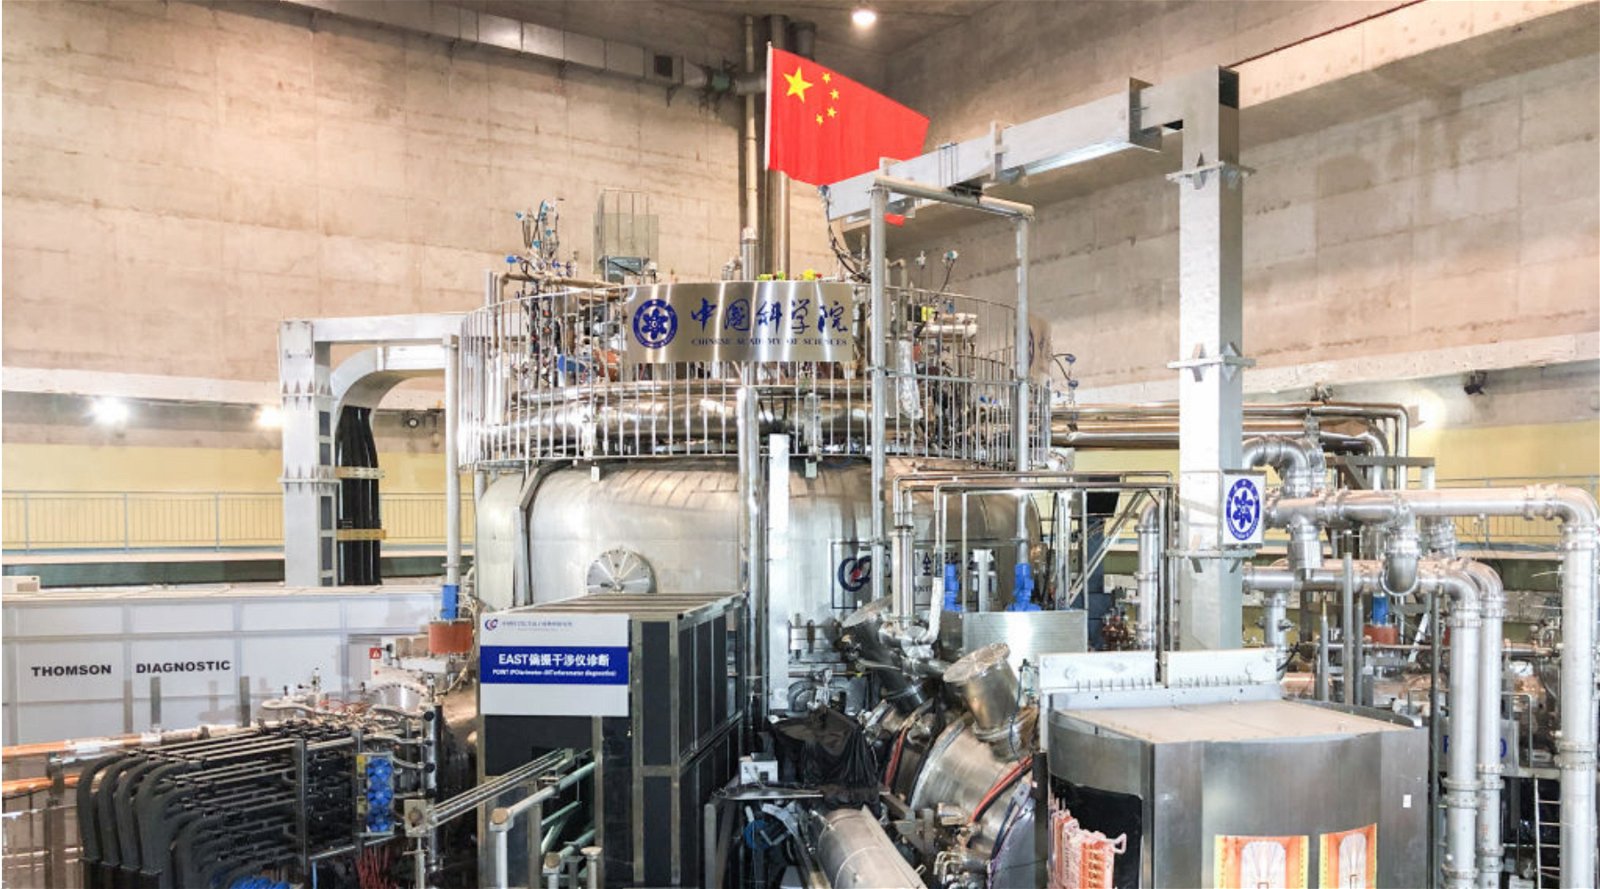 The race towards nuclear fusion: China also succeeded in conducting an important experiment